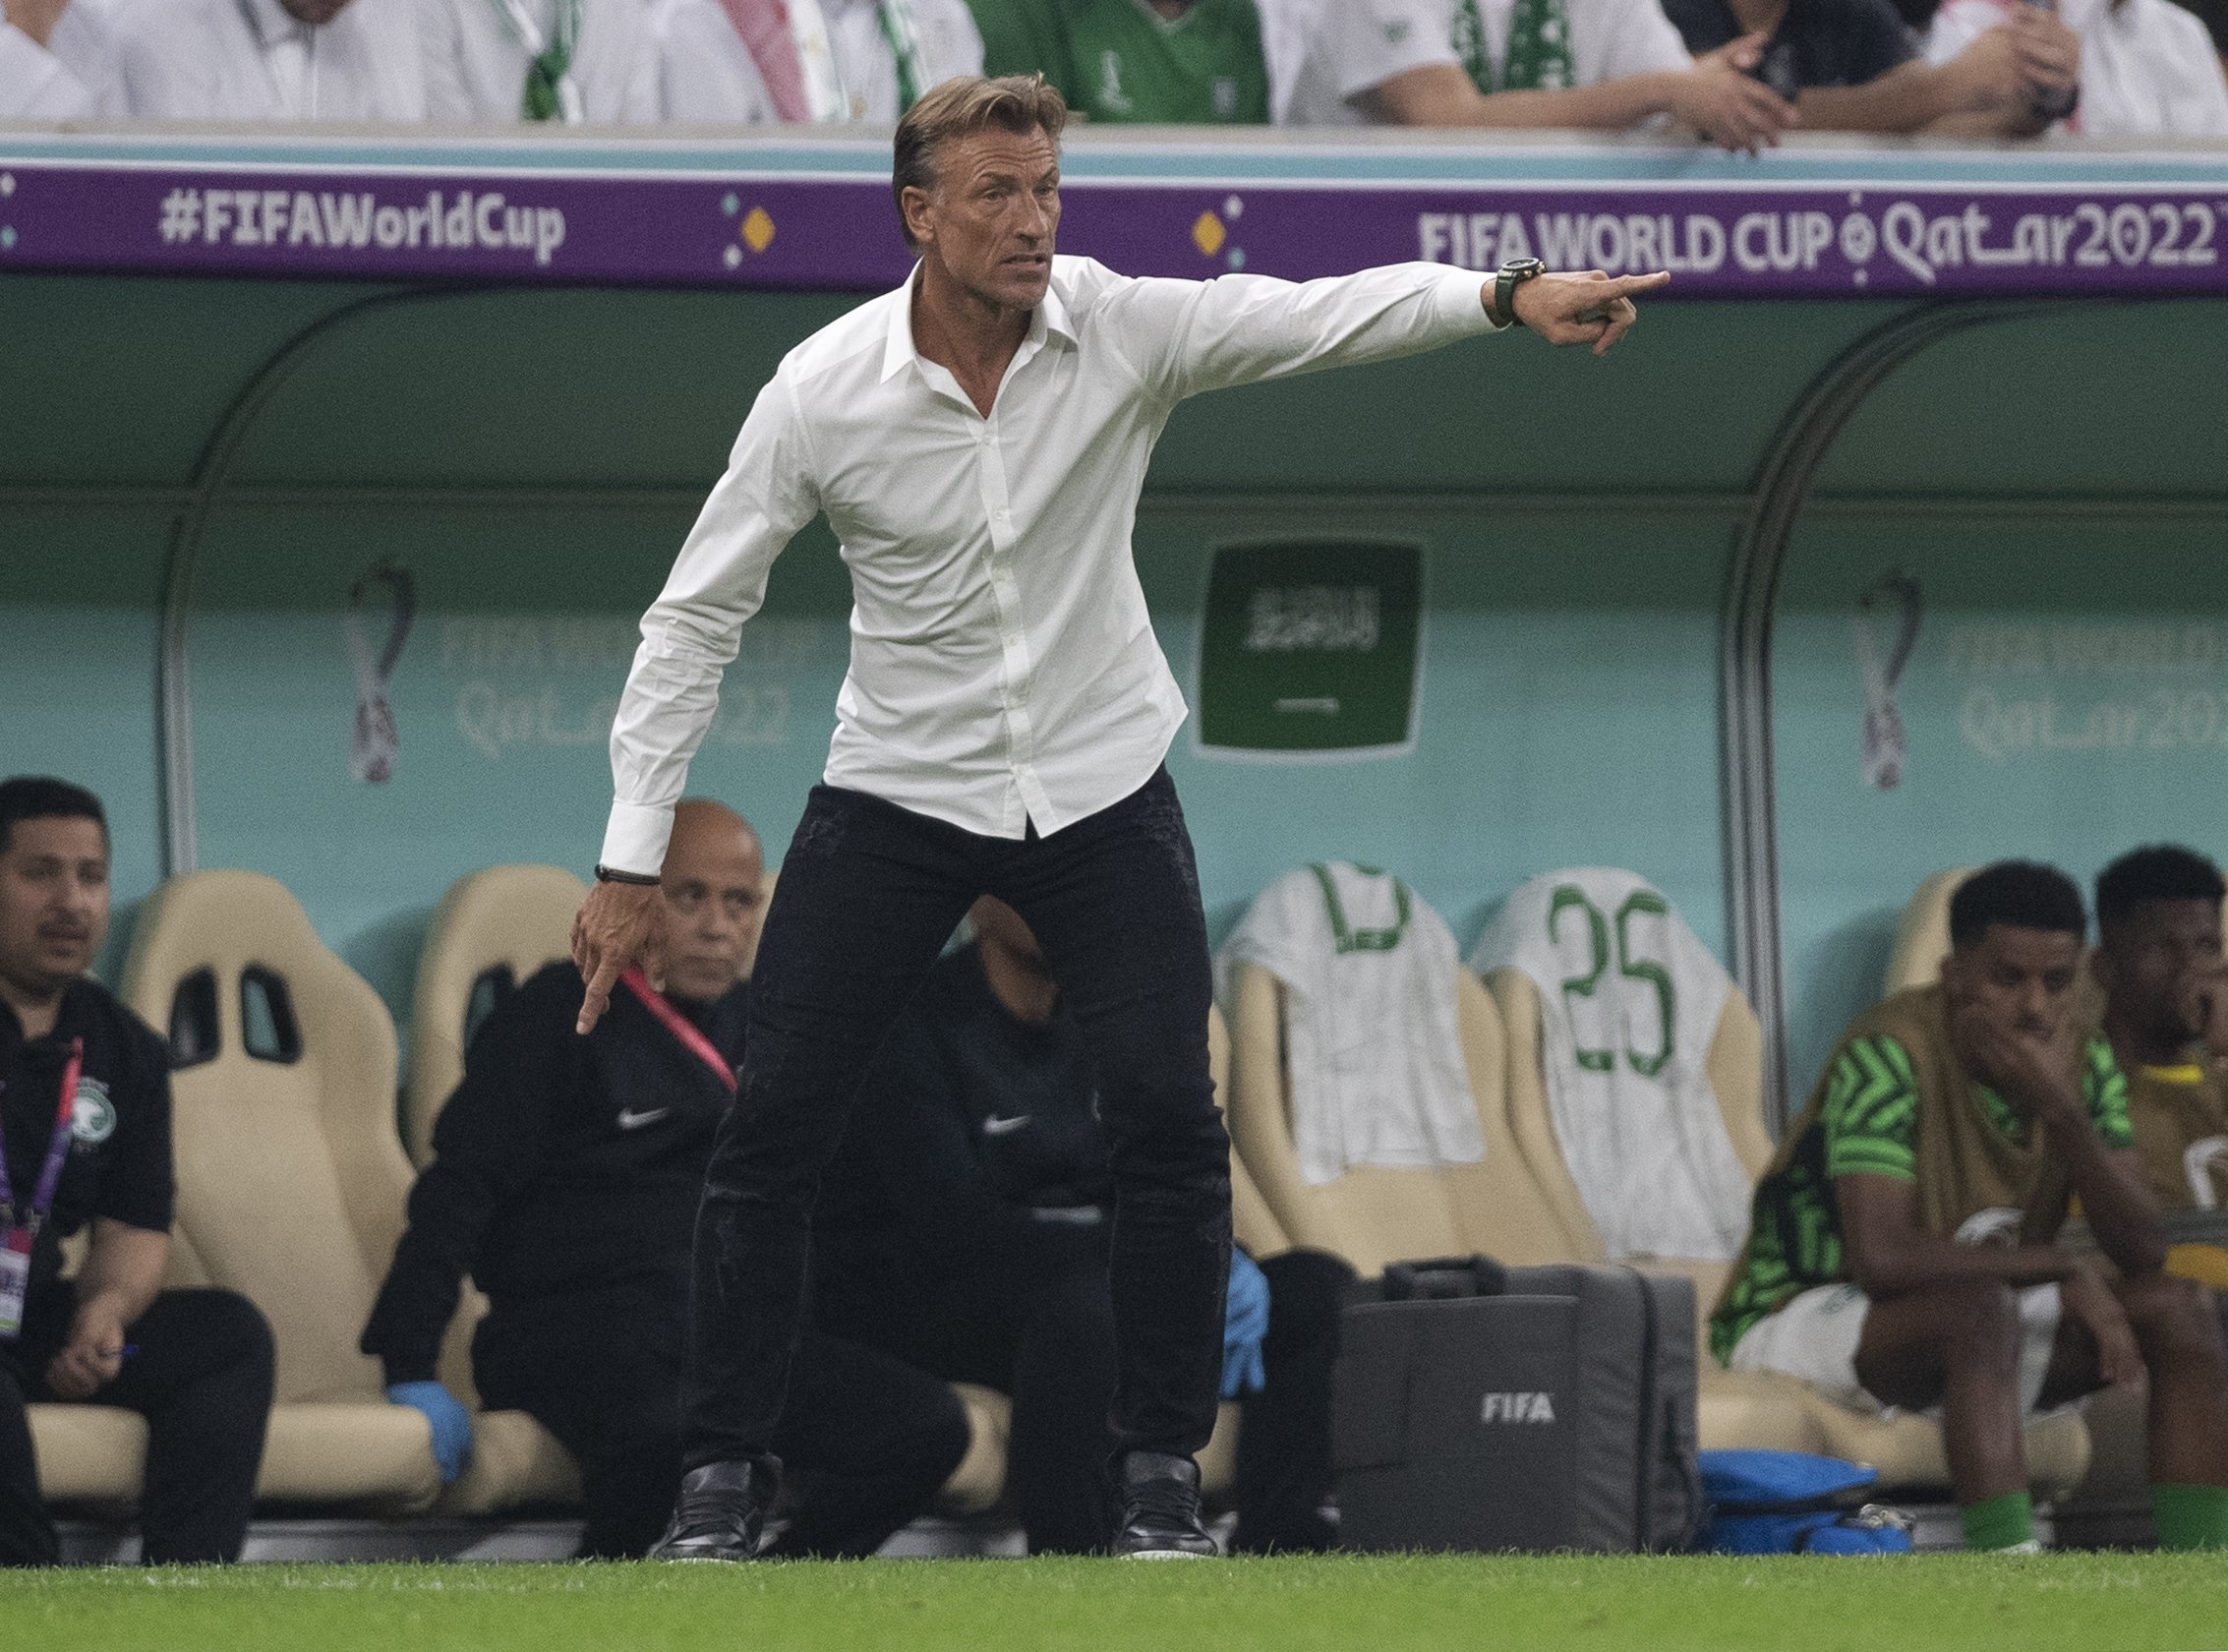 Herve Renard, Morocco's World Cup coach, needs a new gig. What